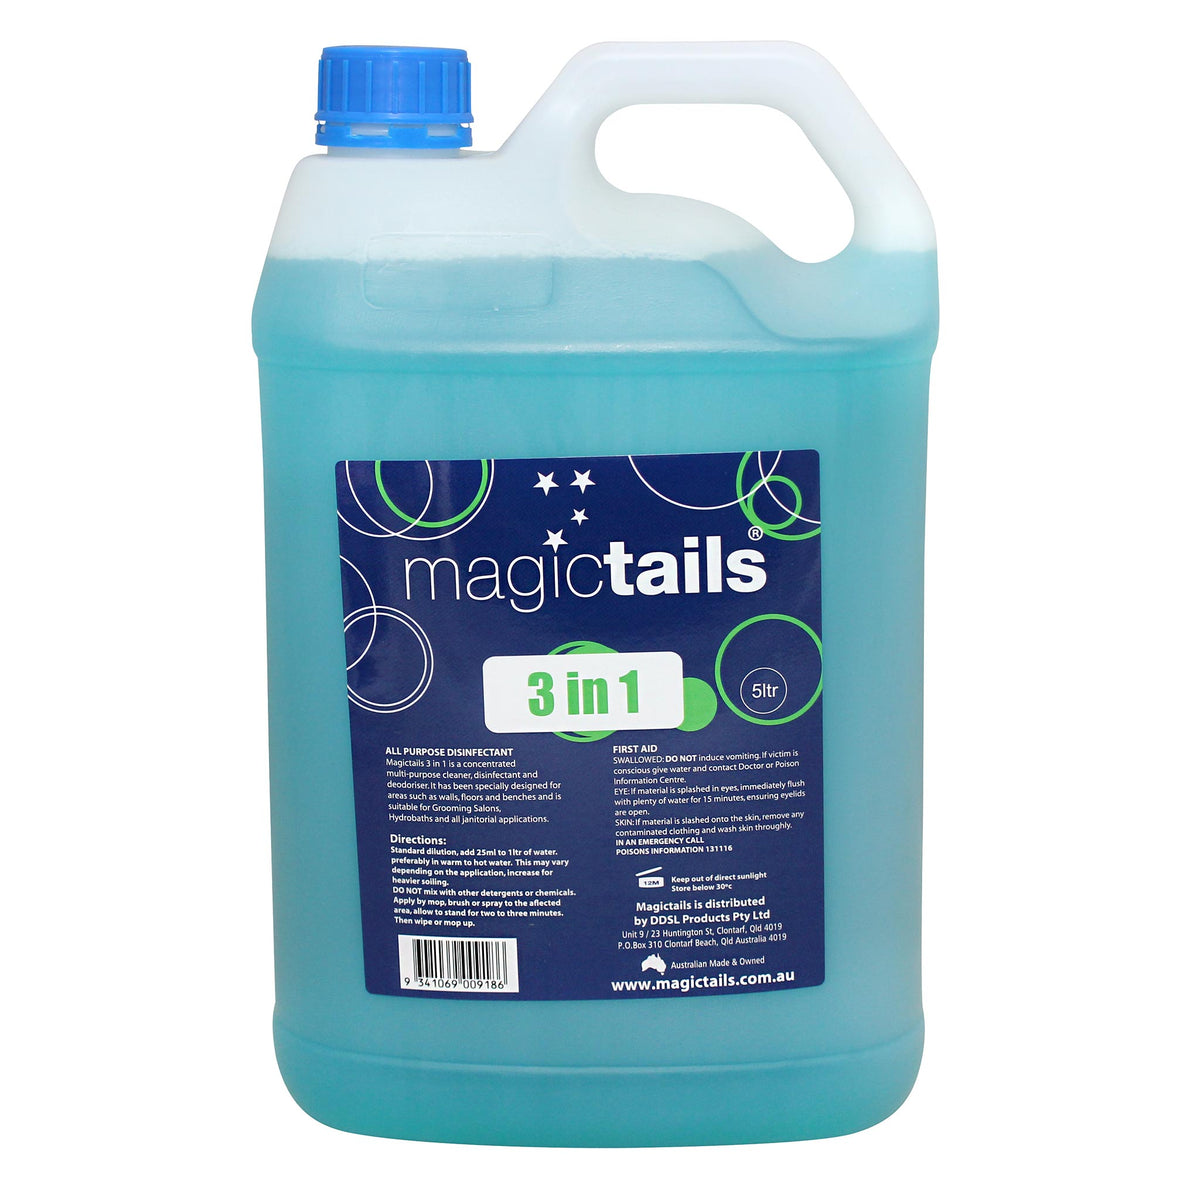 Magictails 3 in 1 Disinfectant 5L